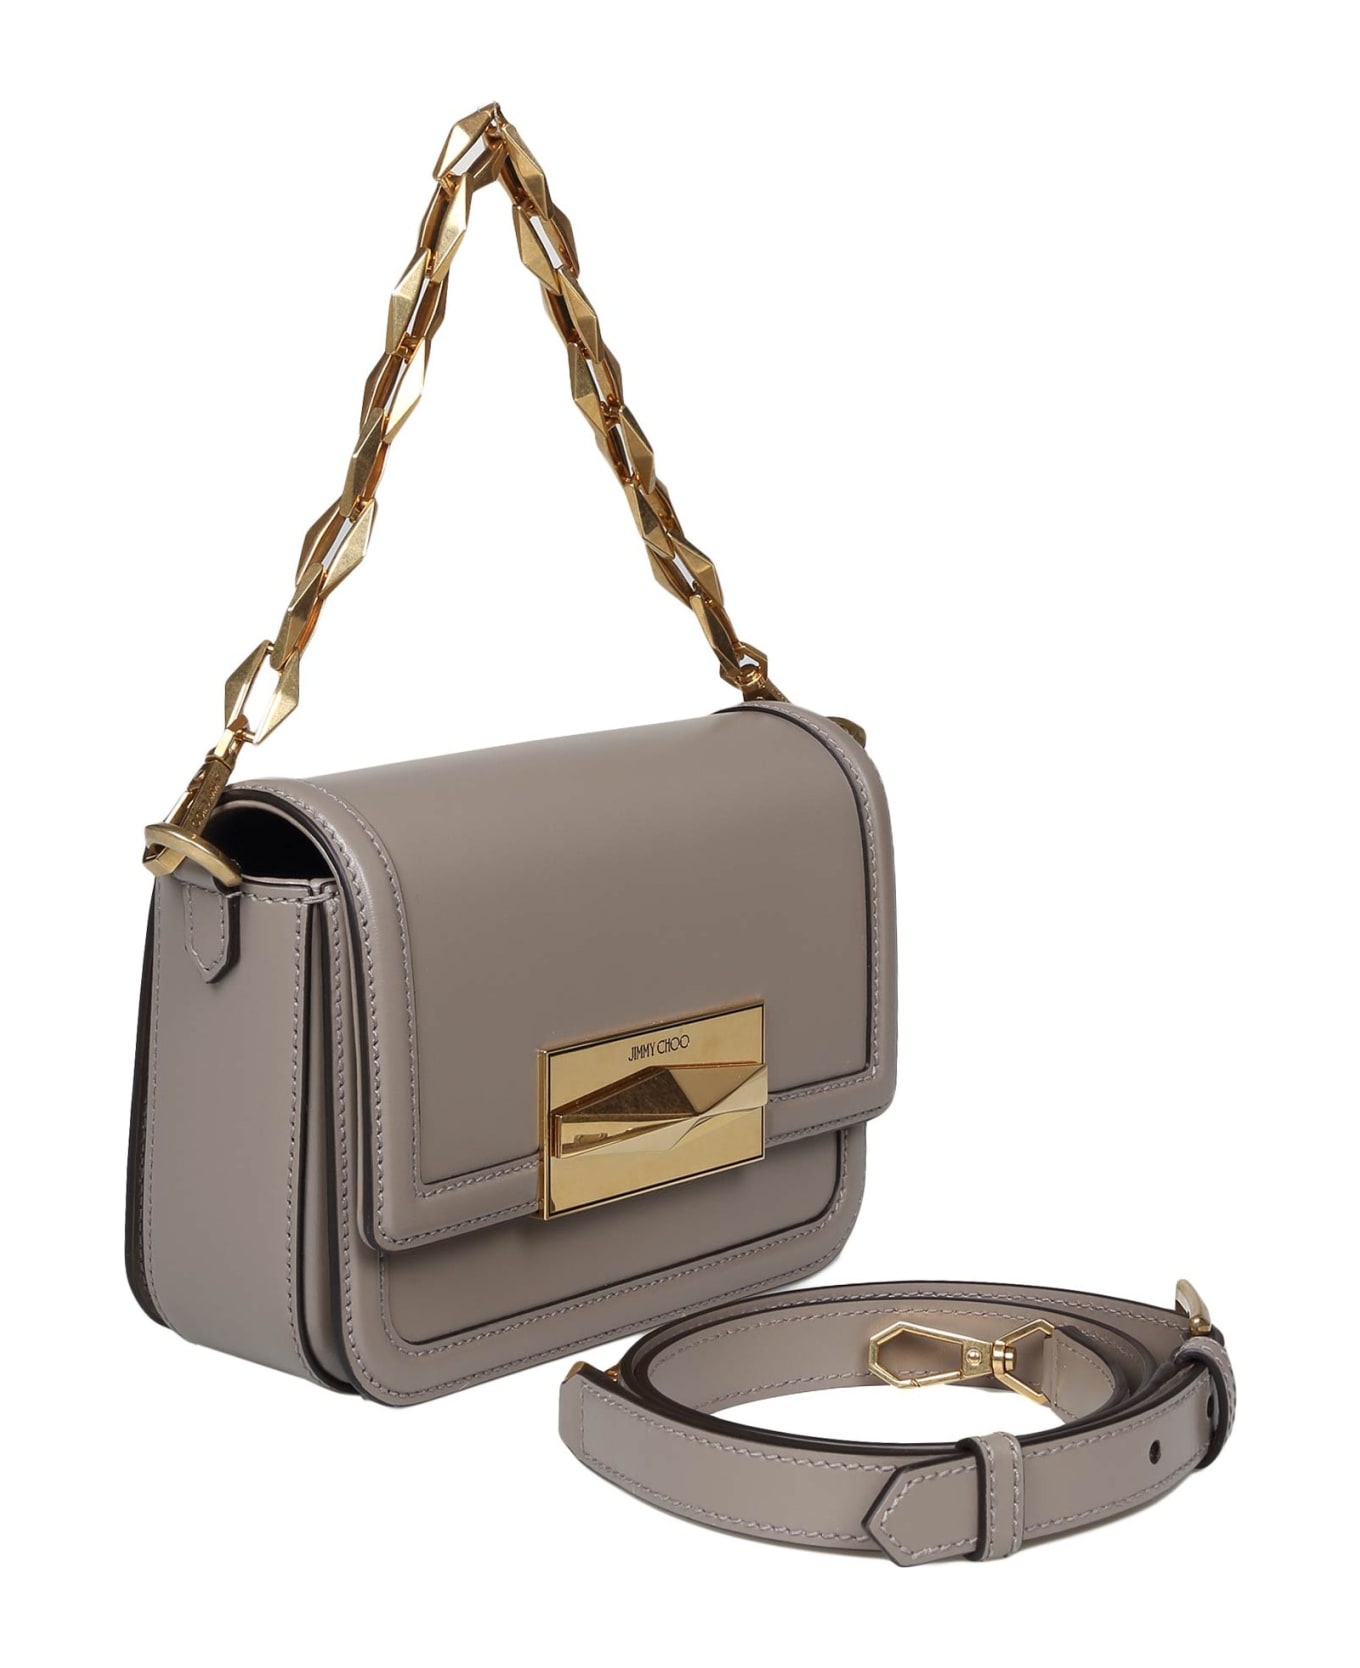 Jimmy Choo Diamond Crossbody Bag In Taupe Color Leather - Taupe ショルダーバッグ